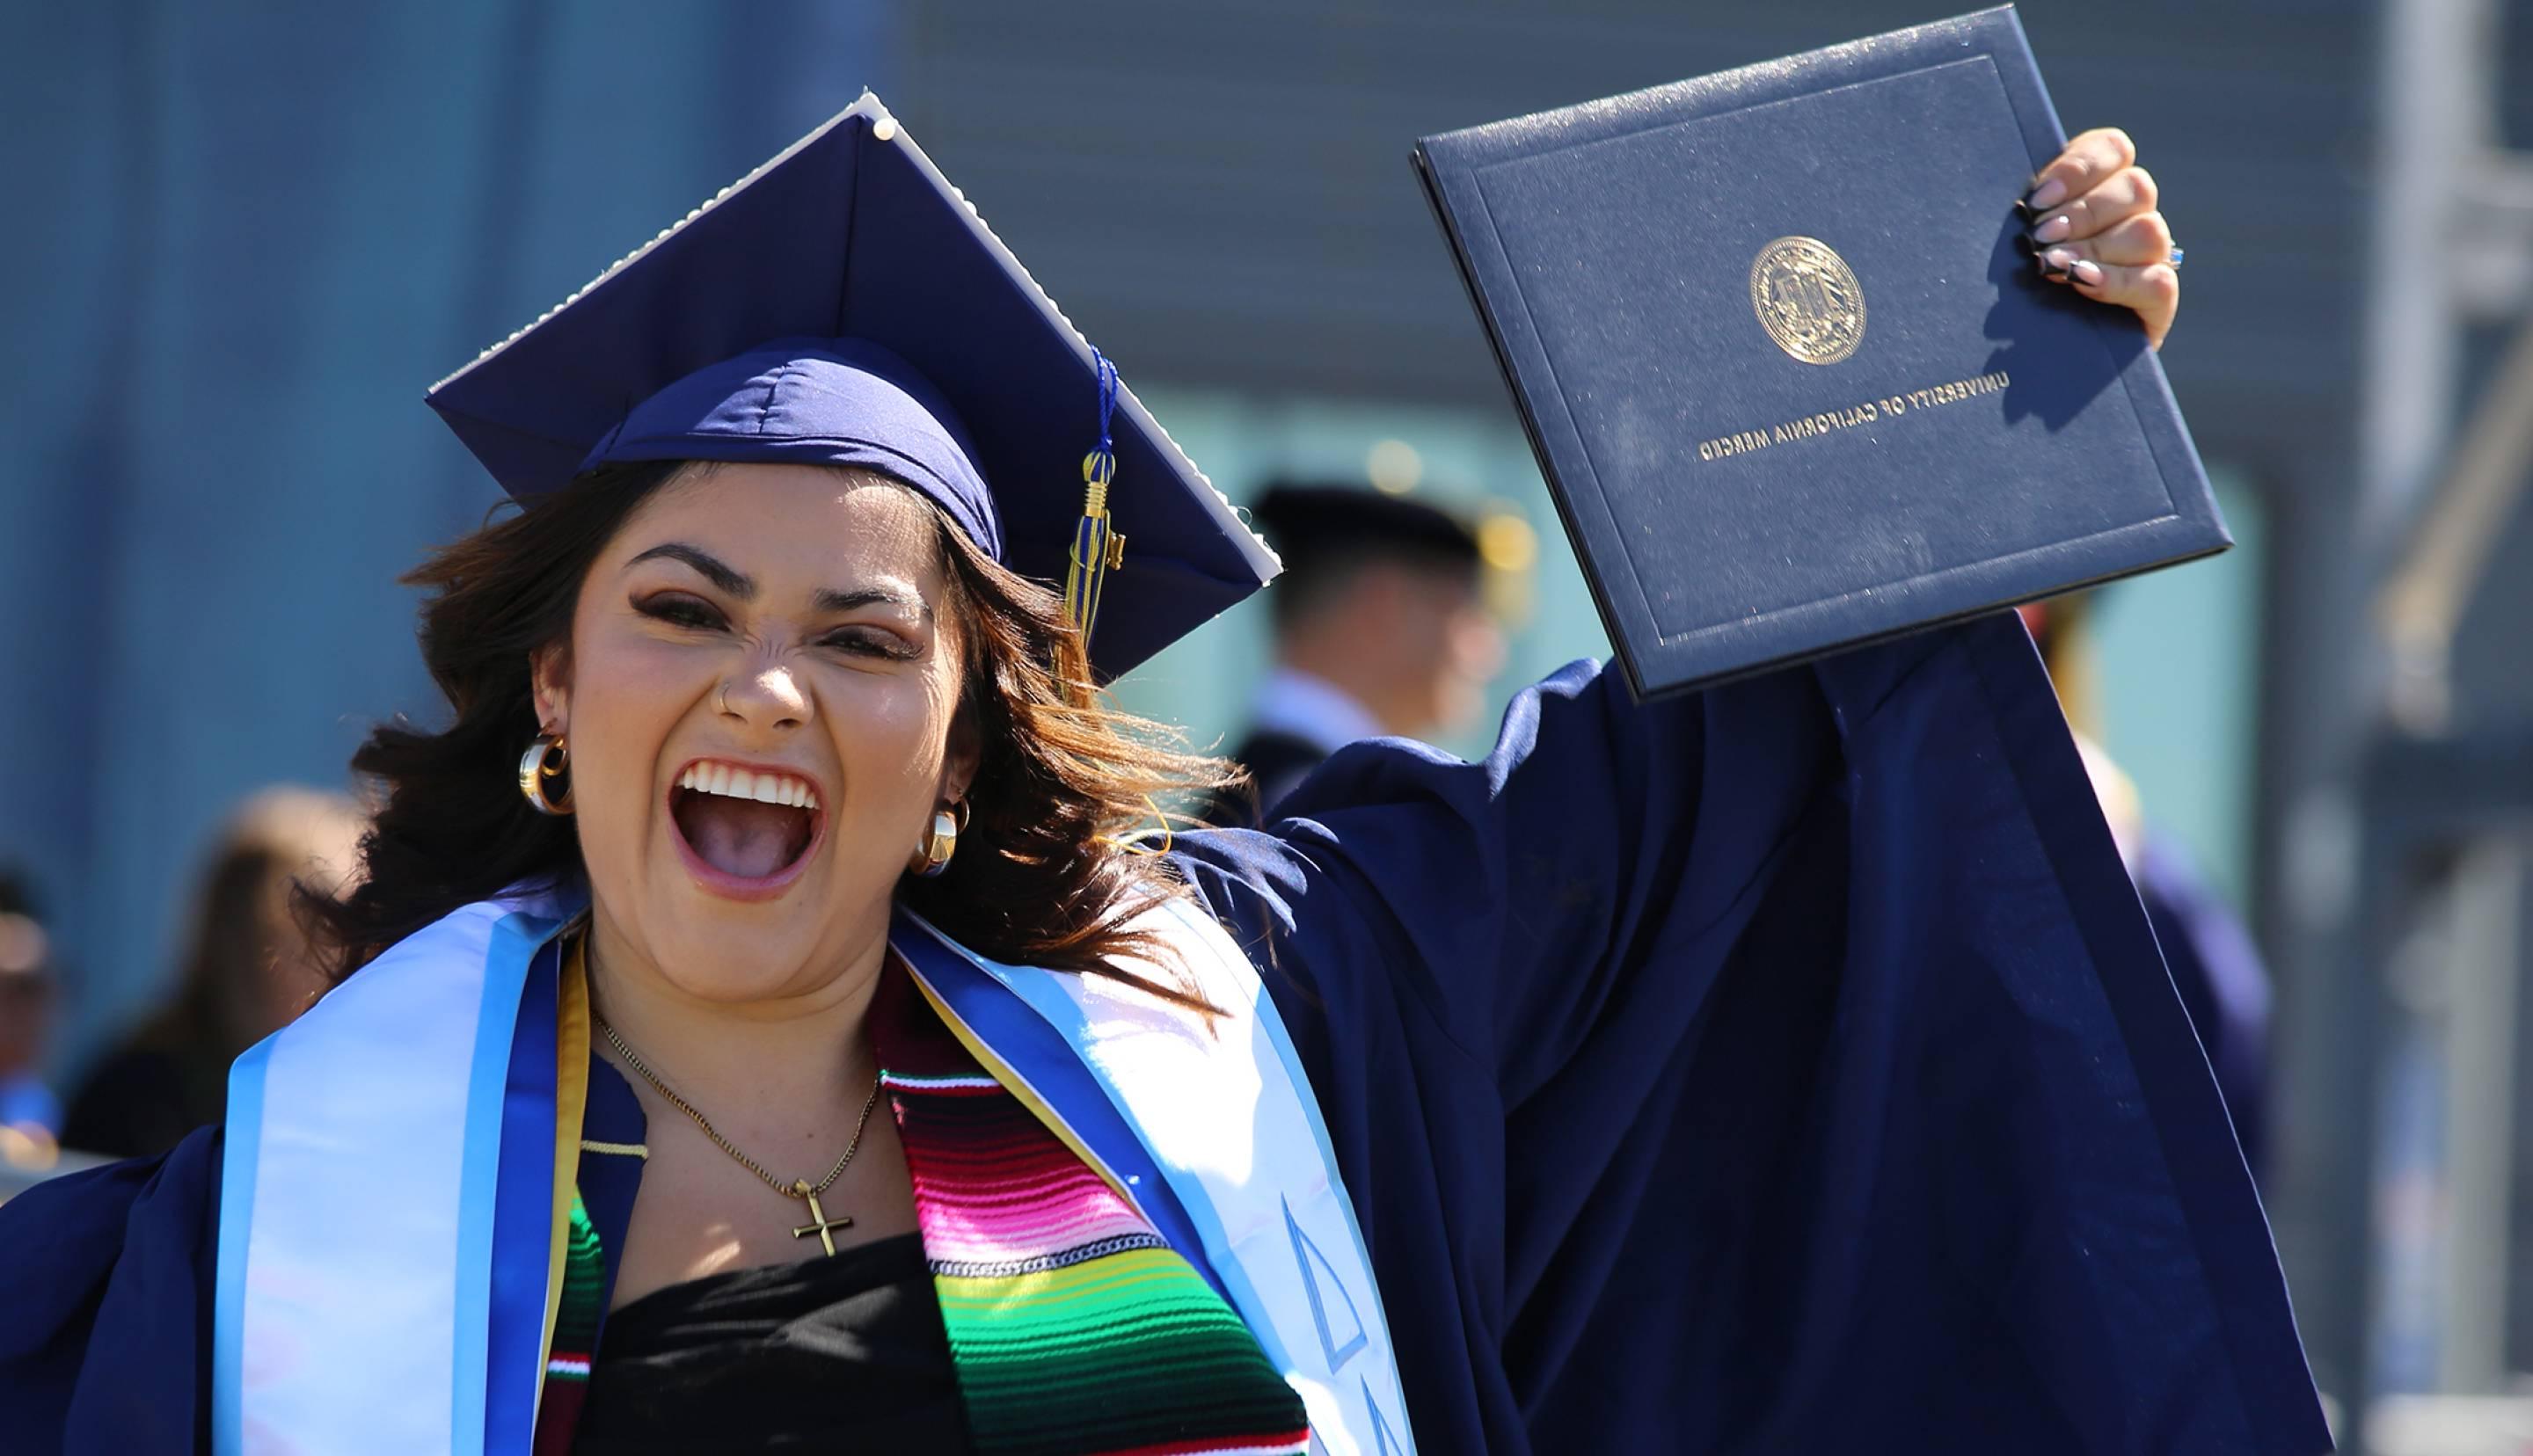 A happy woman graduate holds up her diploma and bears a huge grin as she crosses the stage in cap and gown